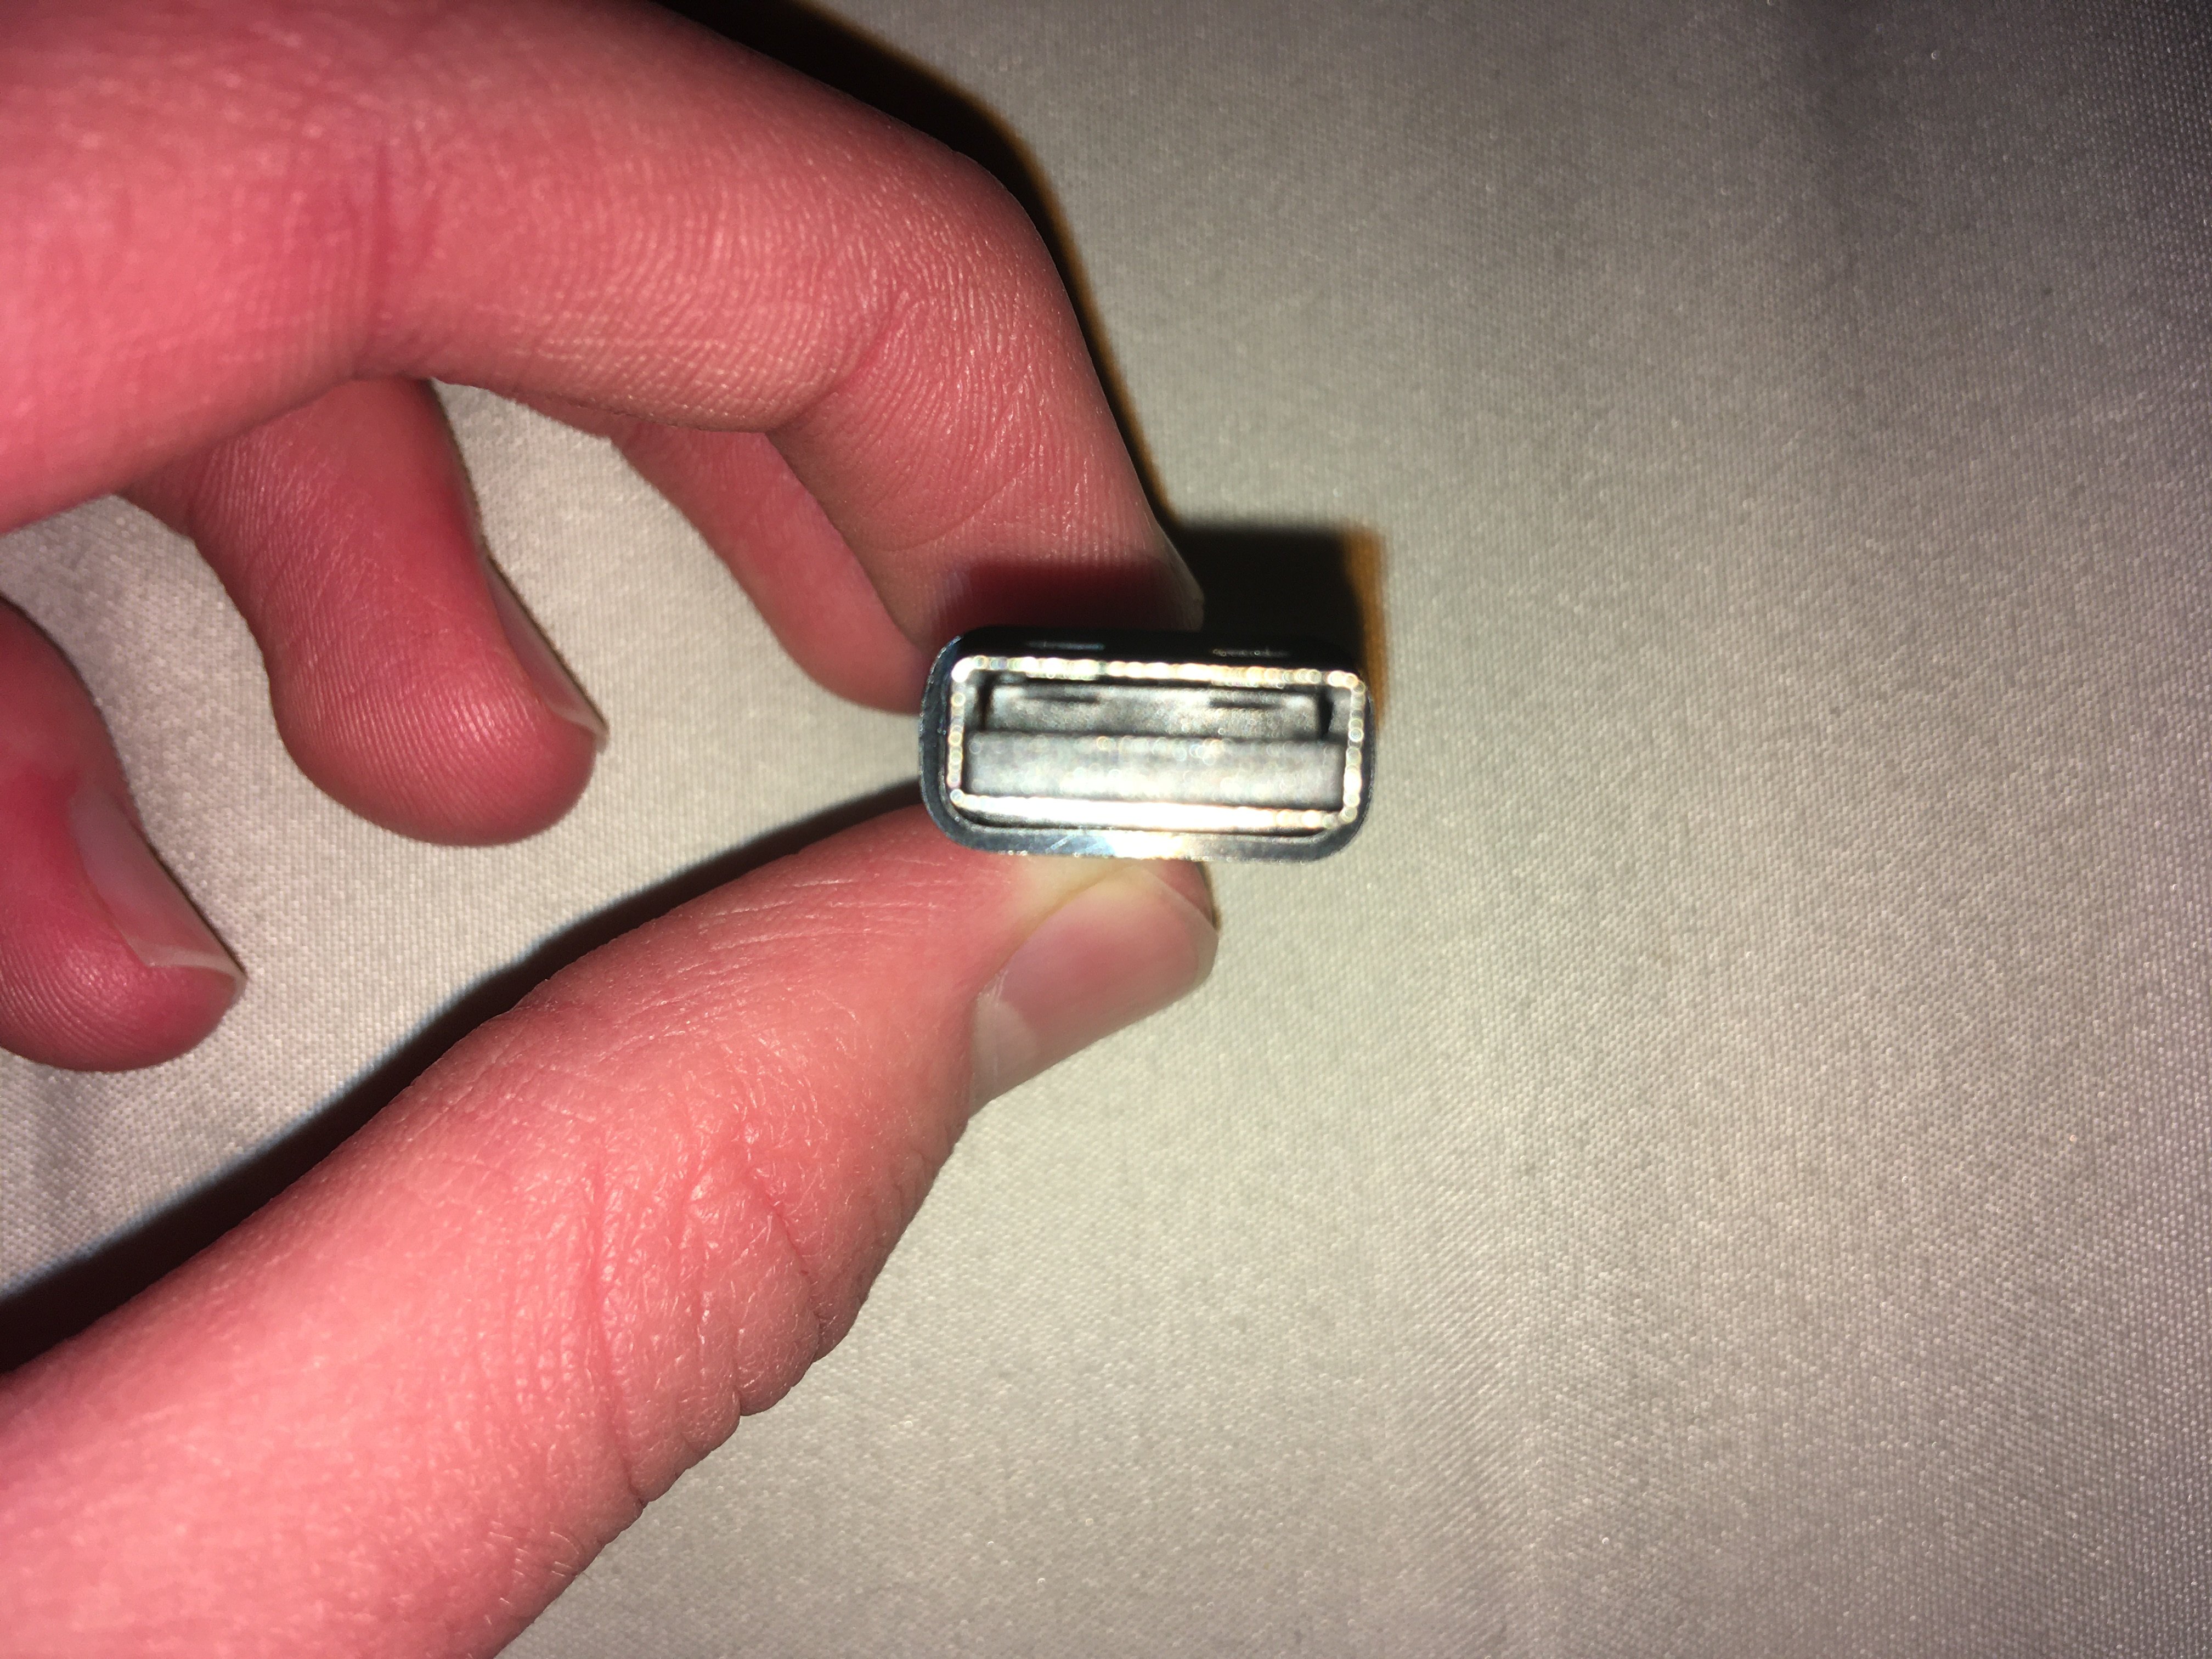 This Is Not A Fake Xbox Wireless Adapter : r/xbox